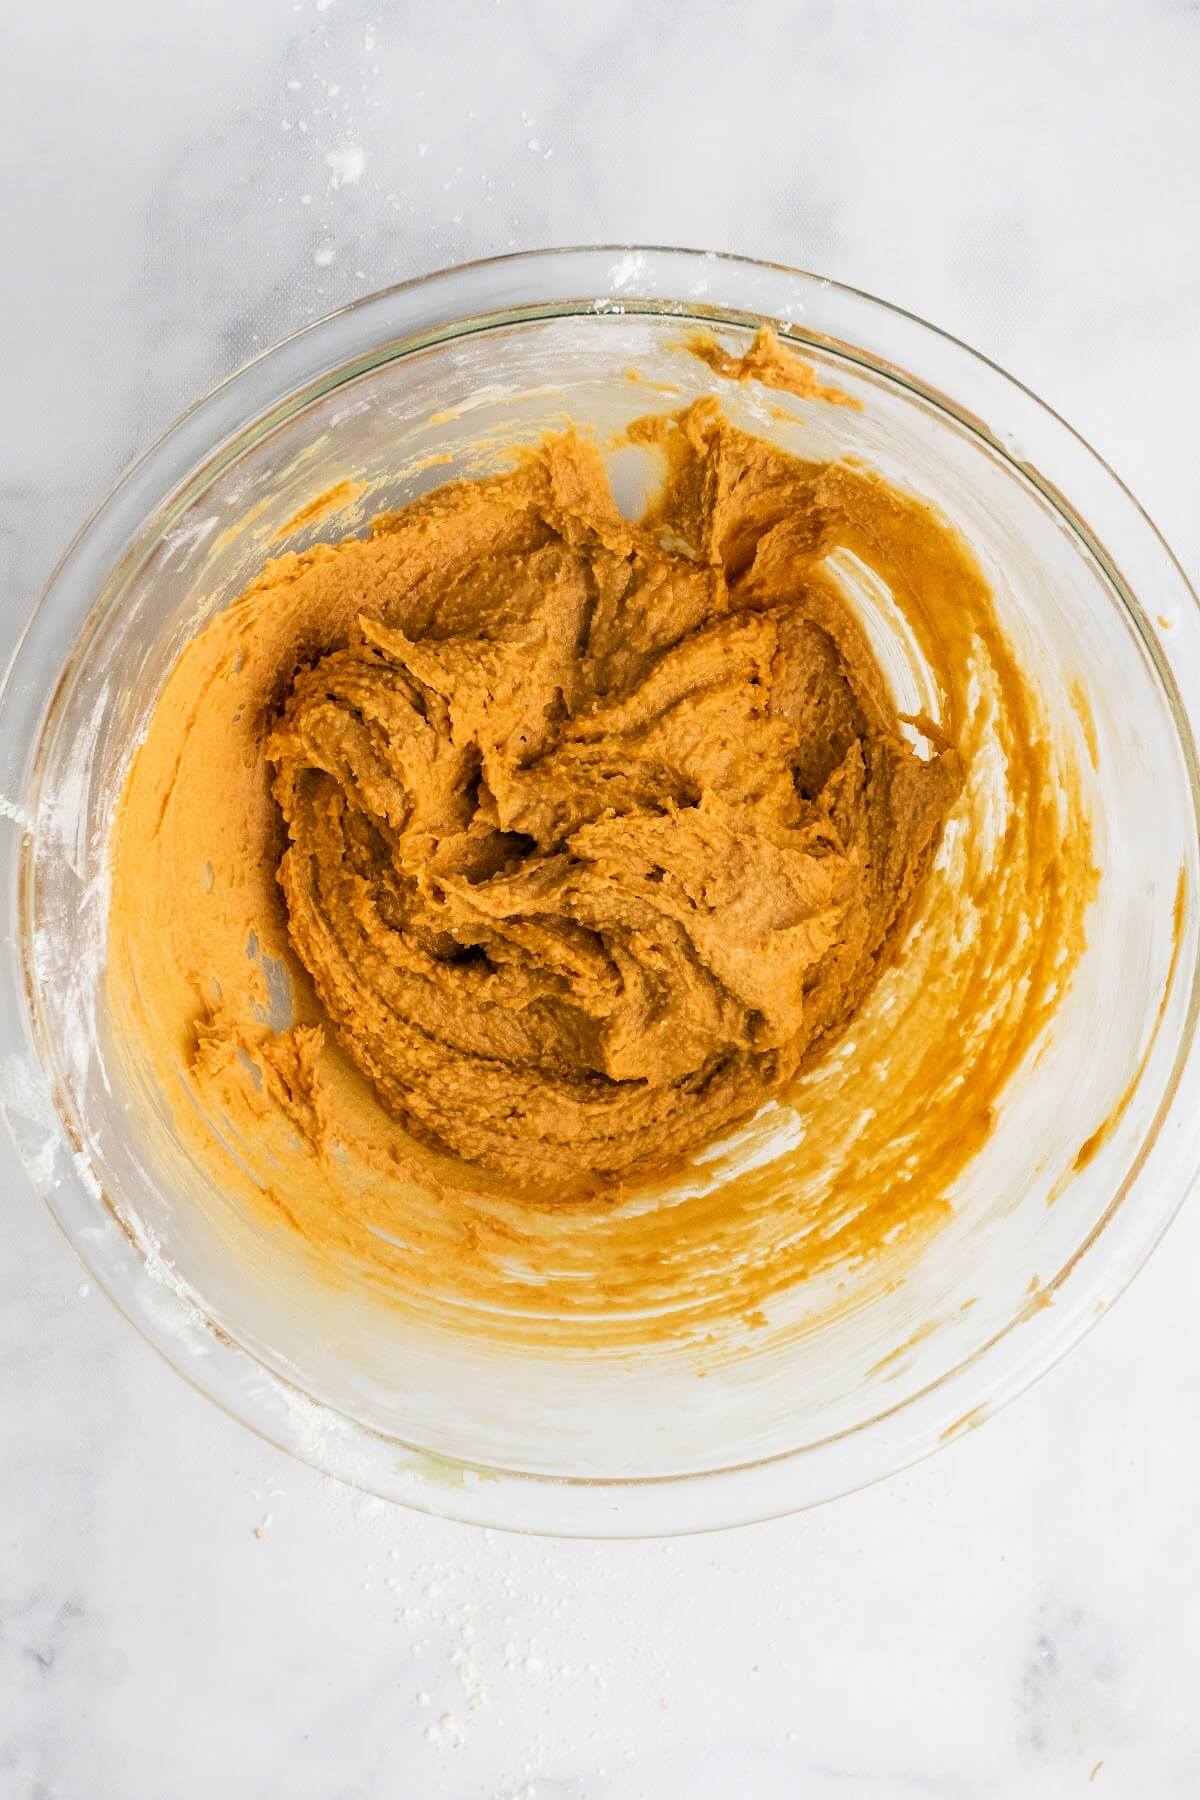 A glass mixing bowl filled with a creamy, thick peanut butter mixture.